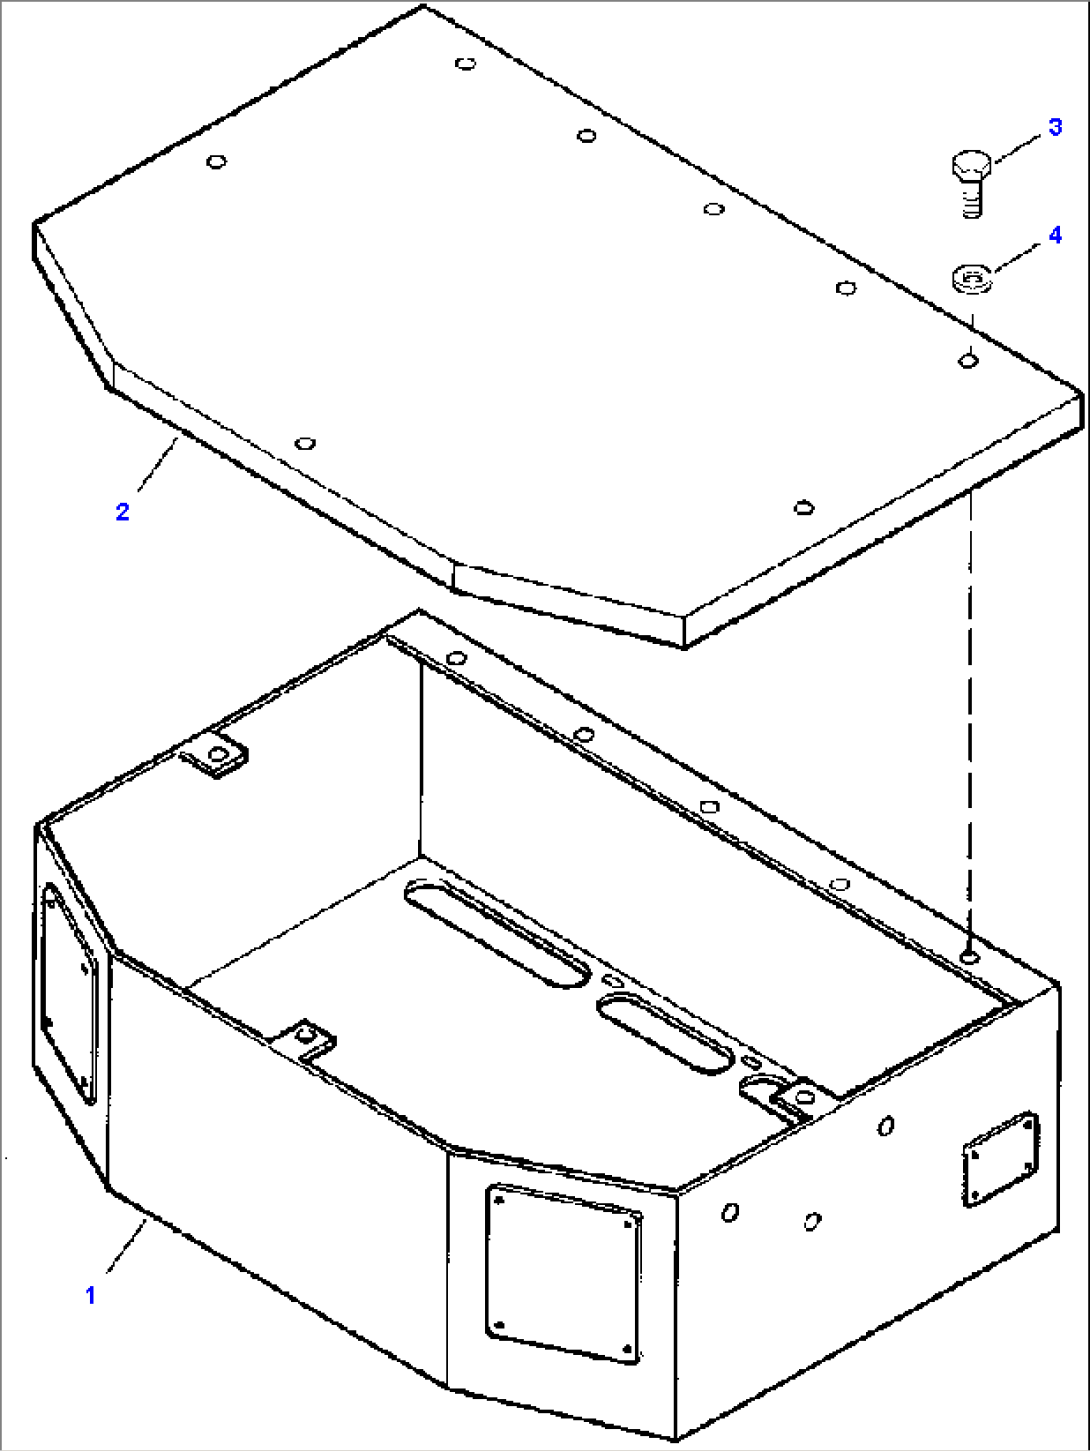 FIG. K5170-01A2A SEAT BOX - S/N 203918 AND UP